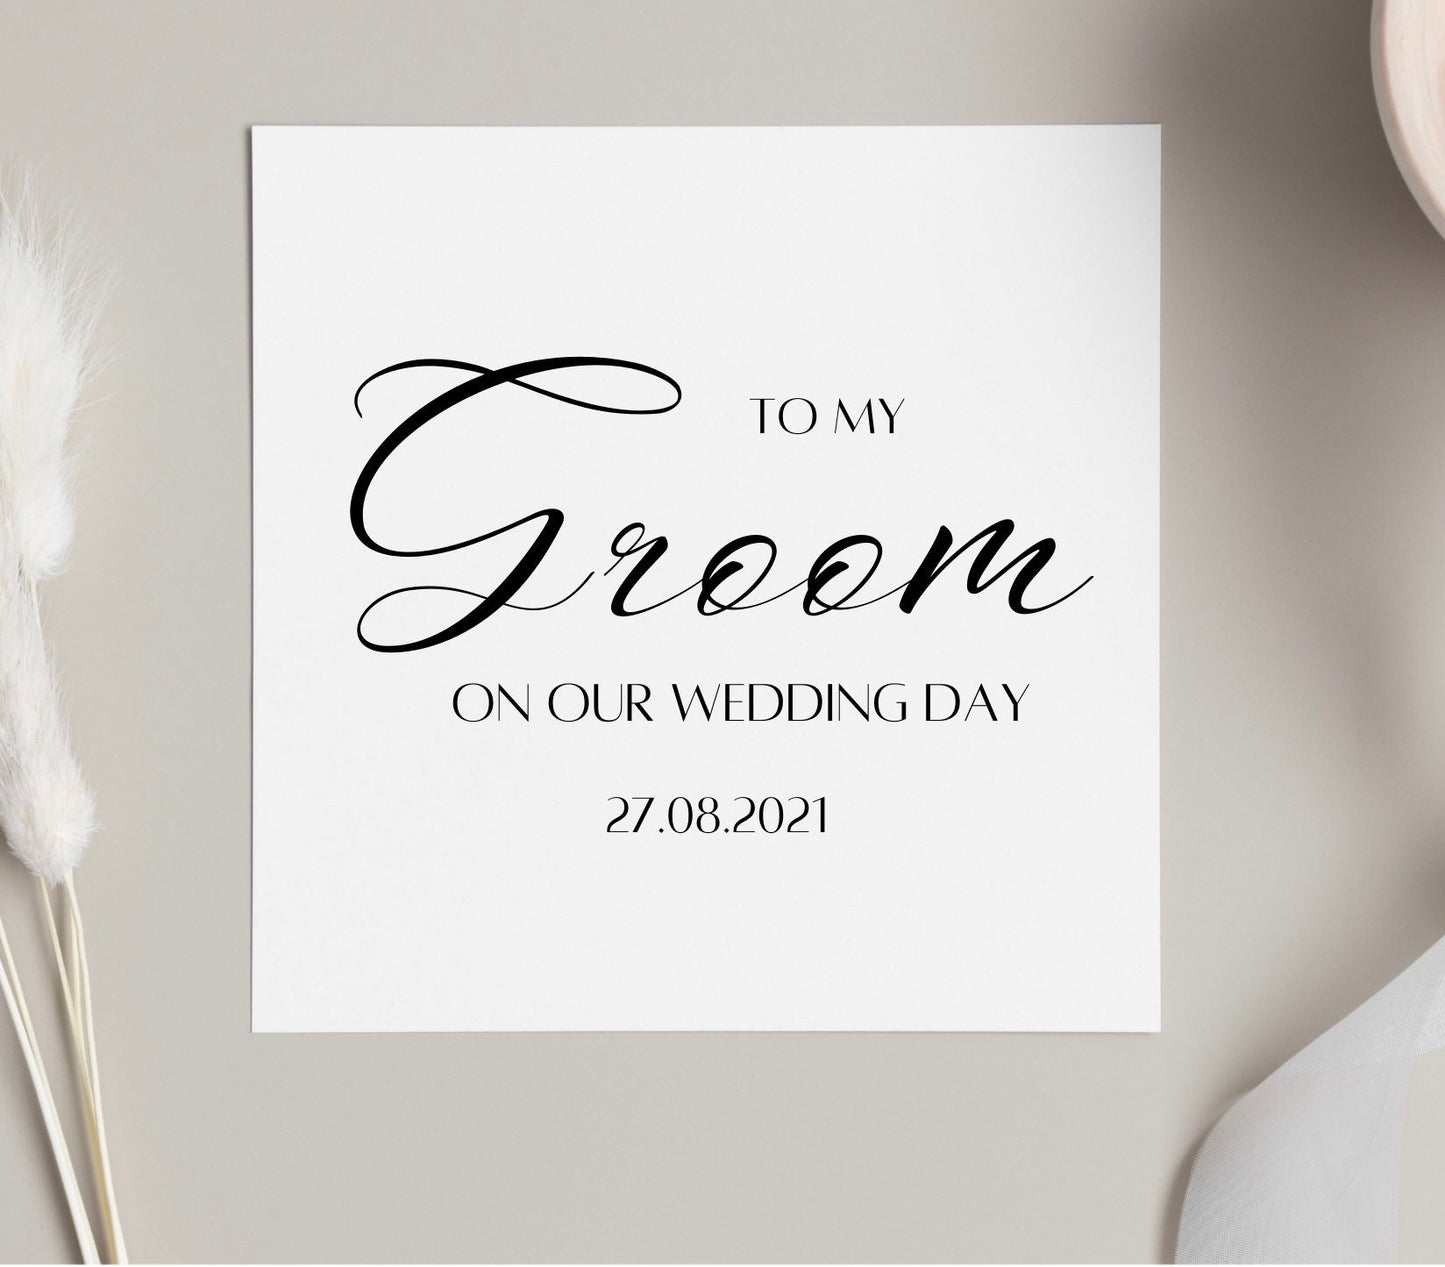 To my groom on our wedding day personalised card for husband to be, cards from bride to be for groom, marry you cards